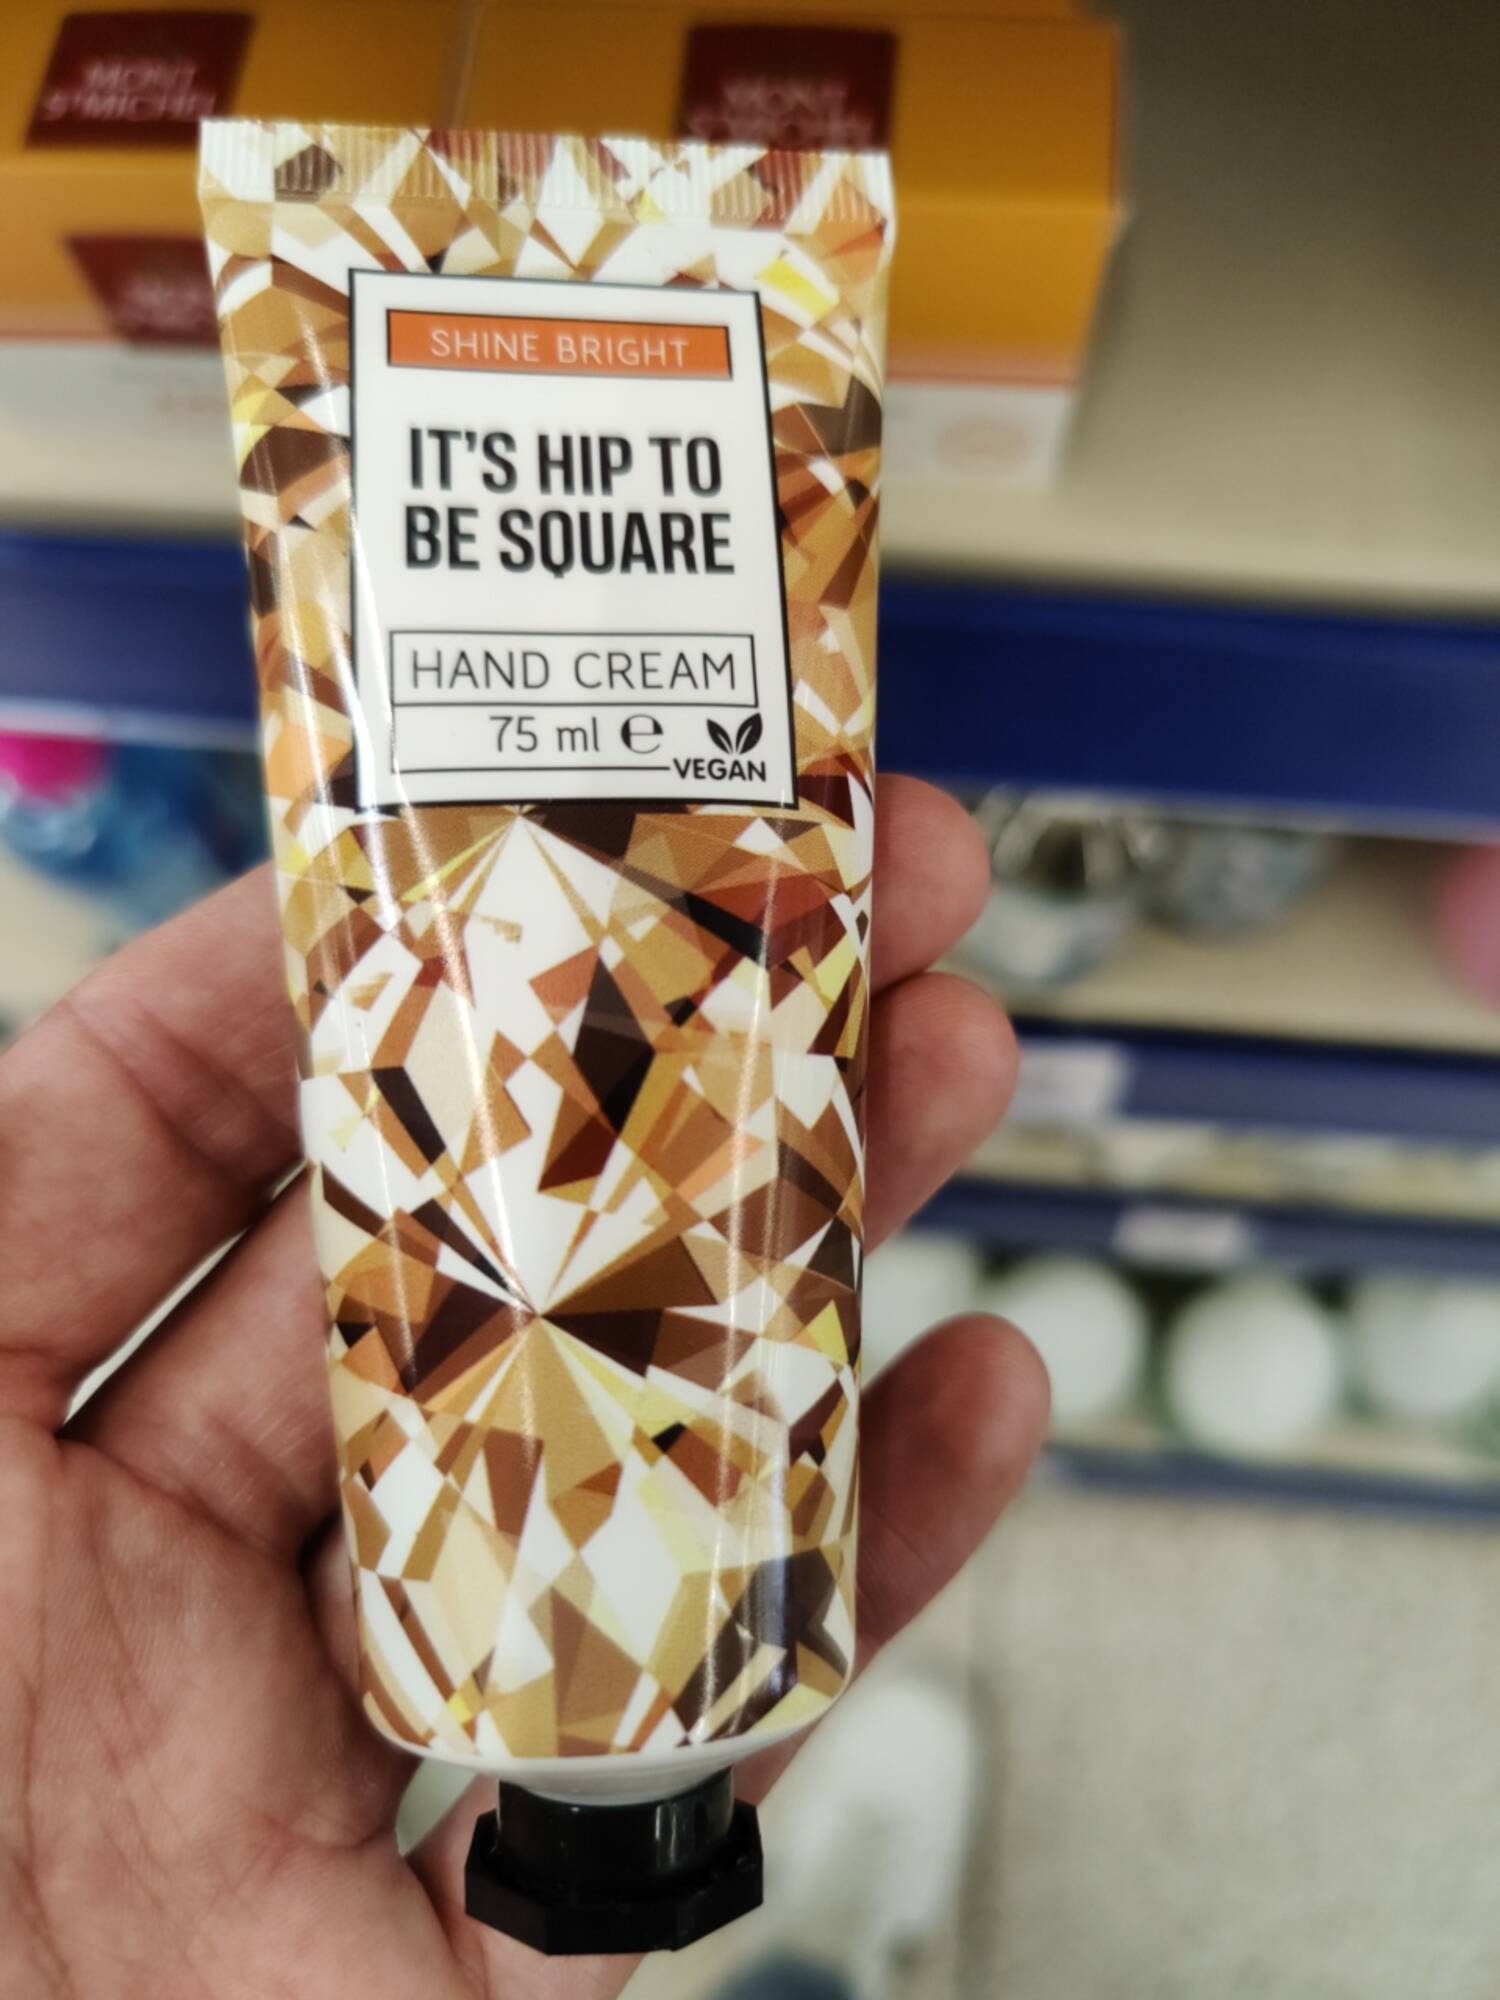 SHINE BRIGHT - It's Hip To Be Square 